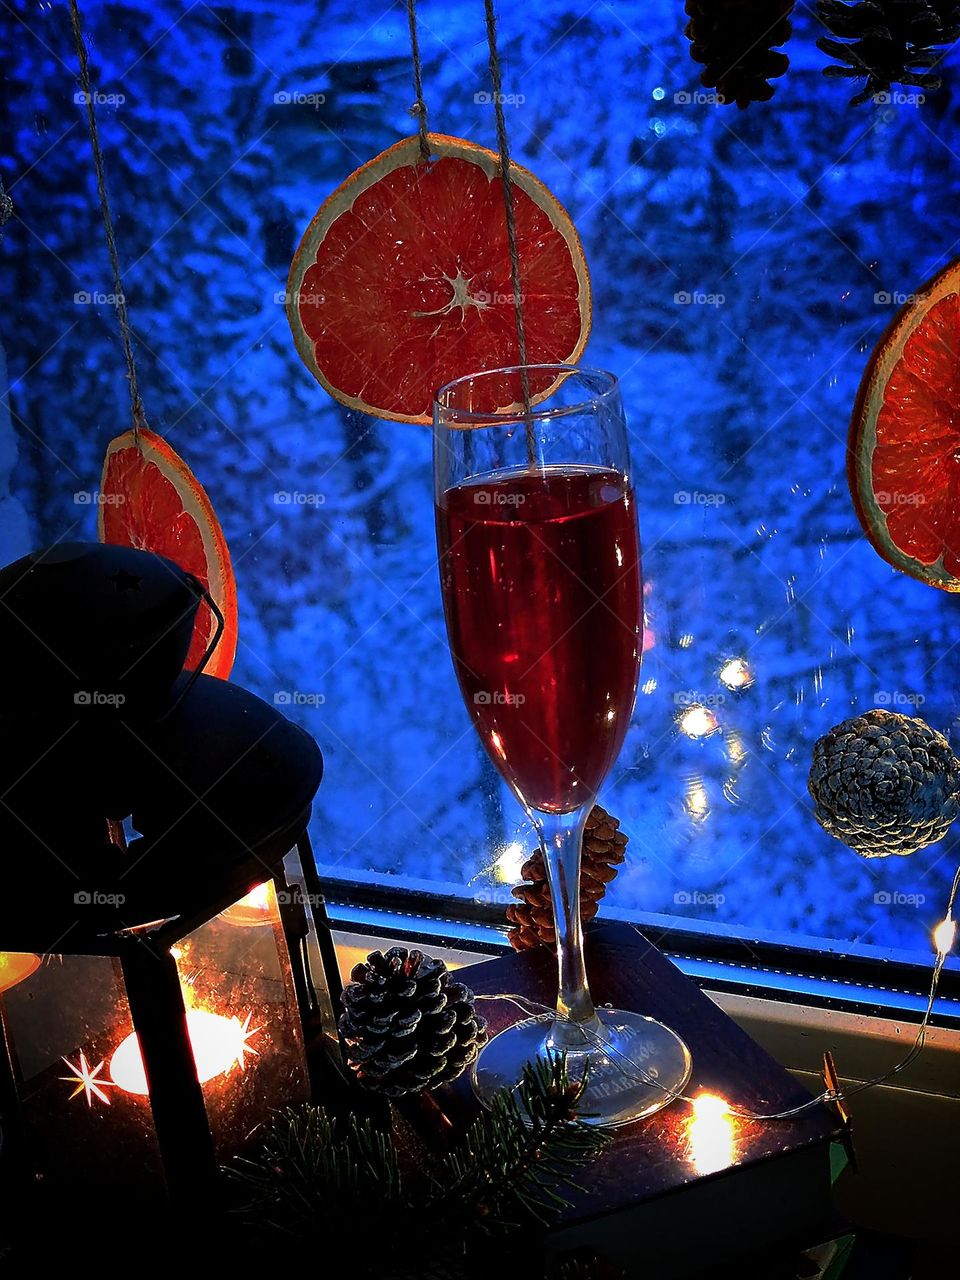 A glass of red wine stads on the windowsill. Next to it is a lantern with a luminous candle and pine cones. Dried oranges and cones hang on the window. Outside the window trees in the snow